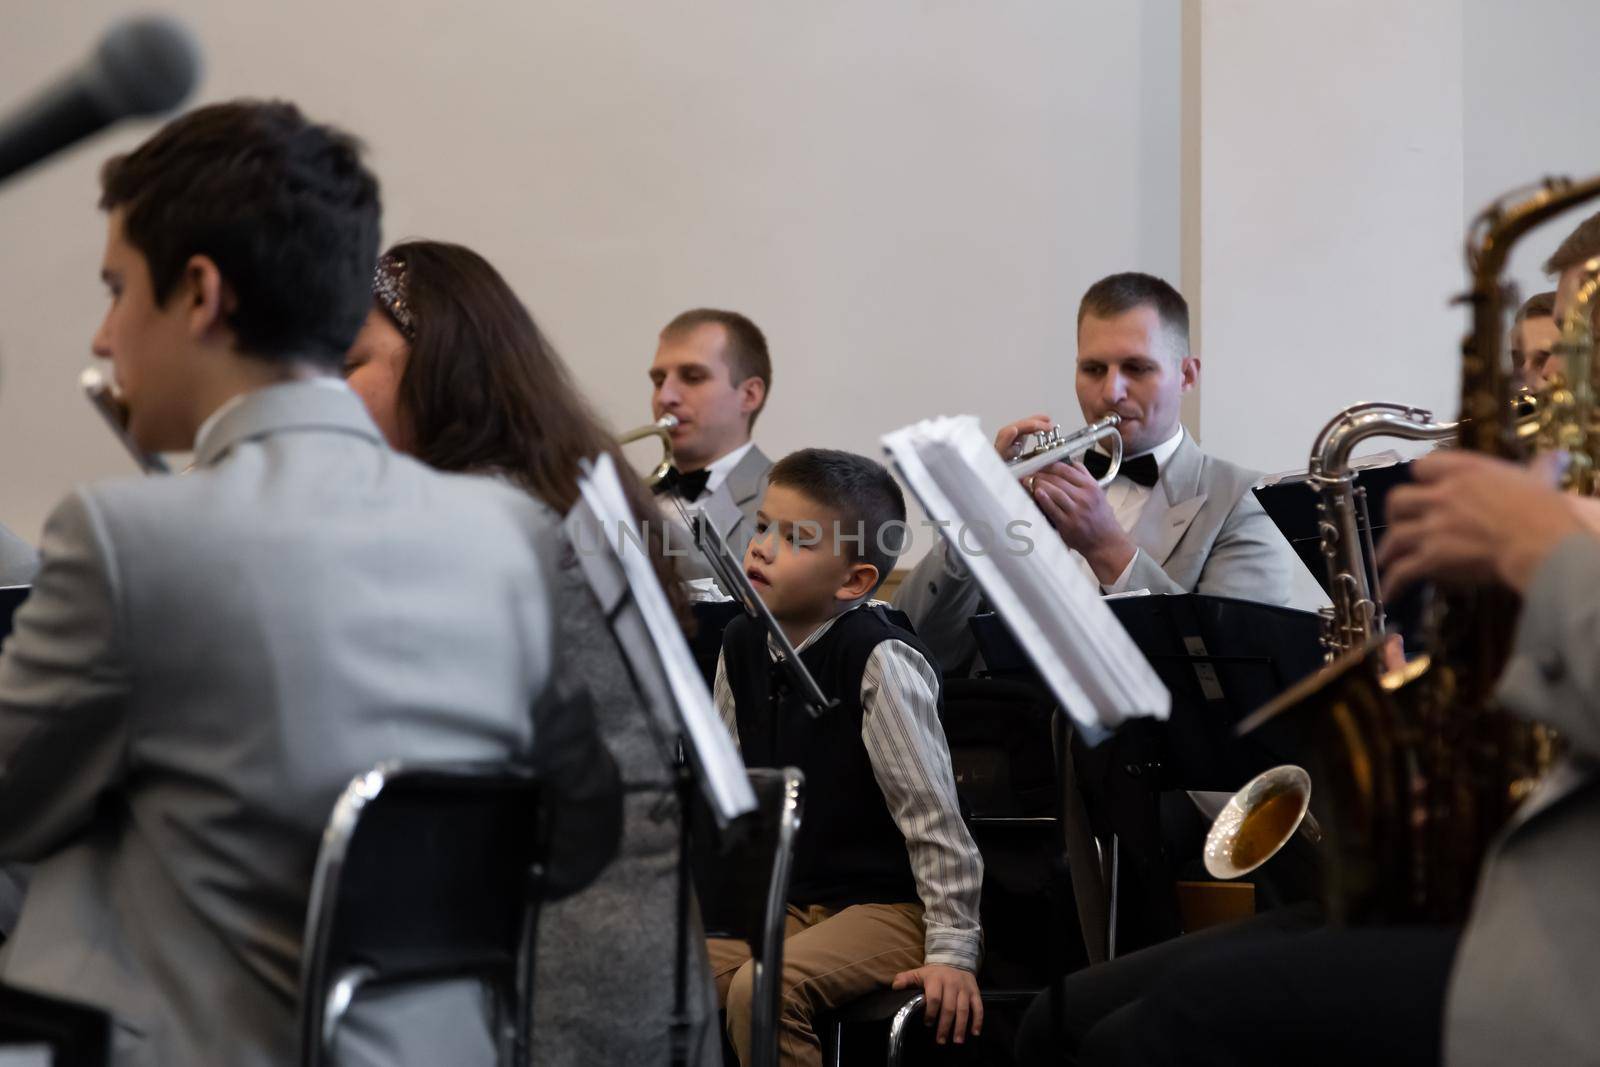 KOROSTEN - NOV, 10, 2019: A little boy sits in an orchestra near the musicians play different musical instruments in gray suits by lunarts